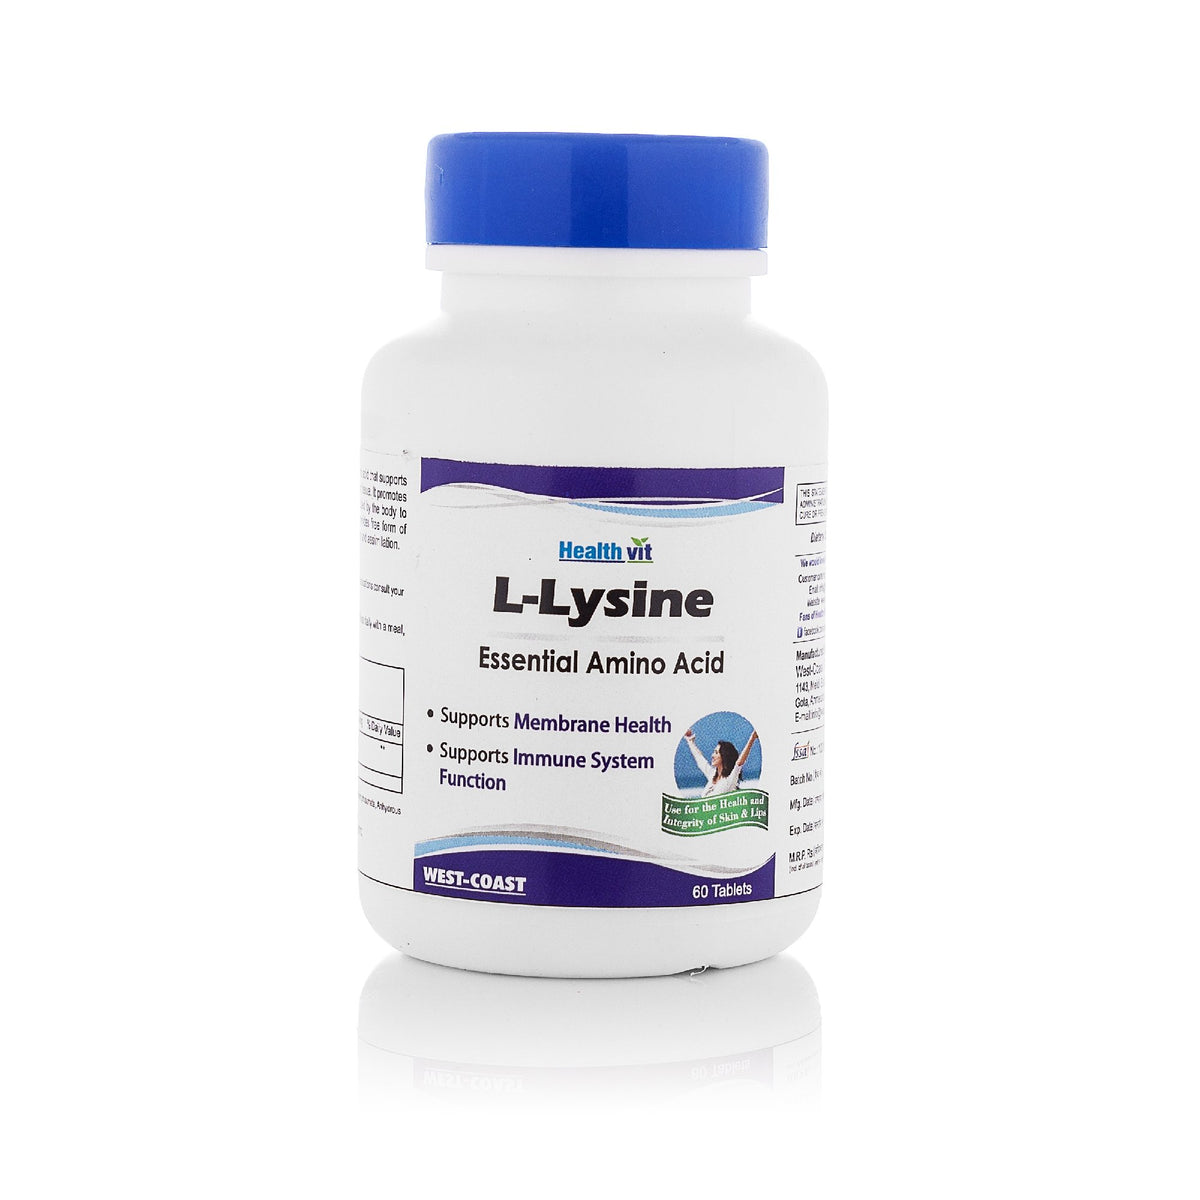 Healthvit L-Lysine 500mg Essential Amino Acid | Supports Membrane Health | Support Immune System | Vegan And Gluten Free | 60 Tablets